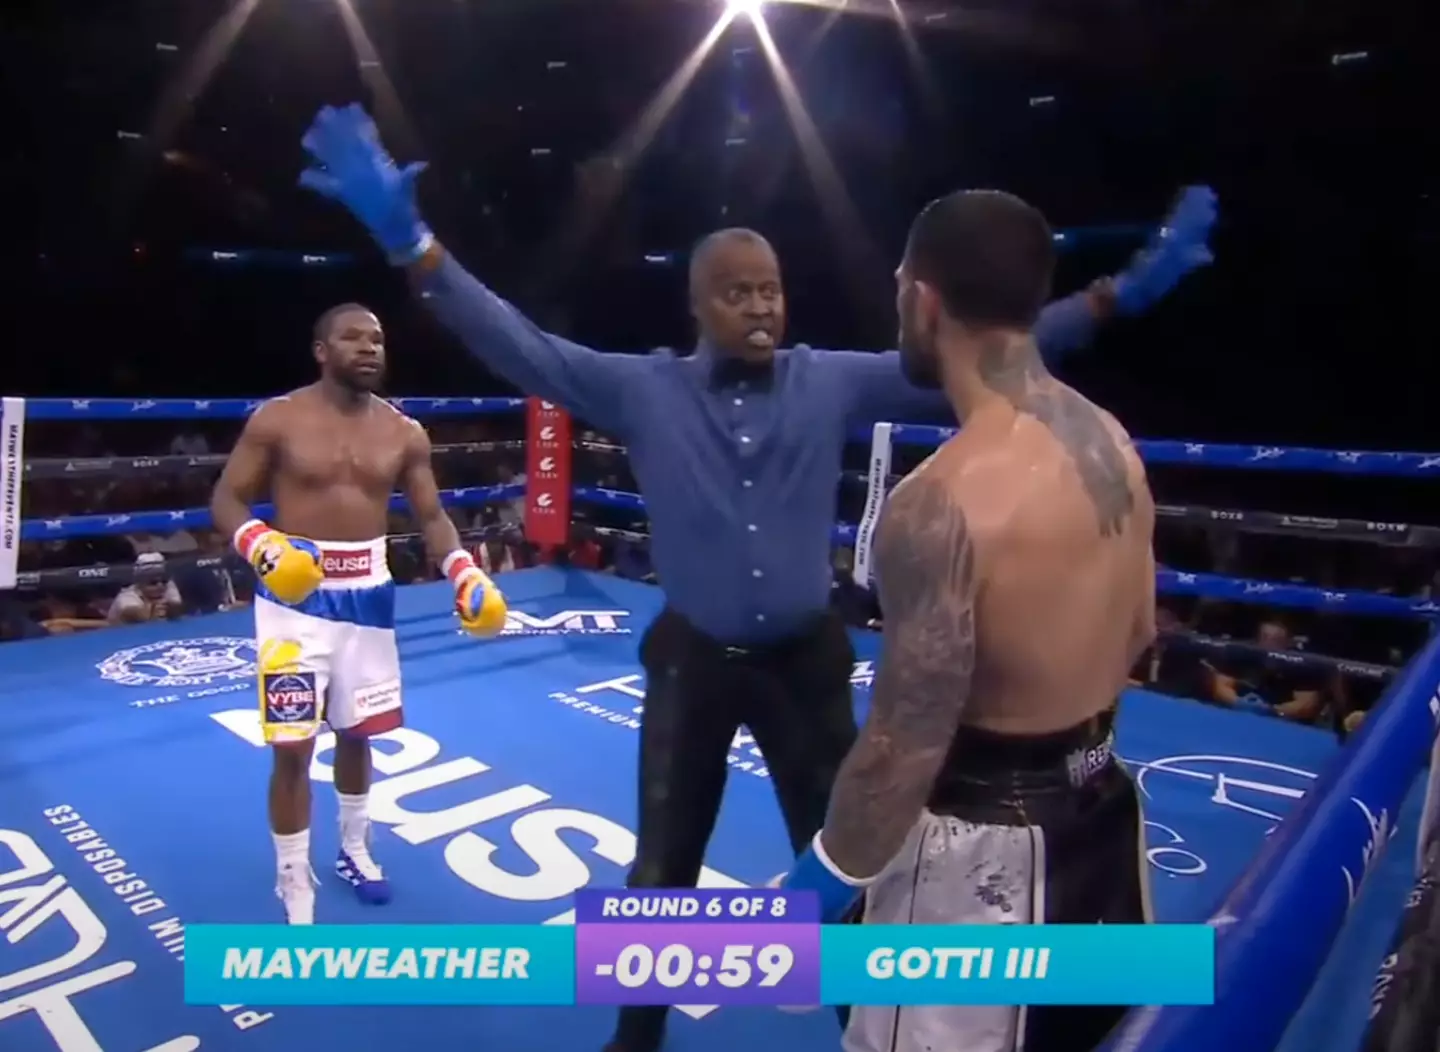 Floyd Mayweather's exhibition fight against the grandson of mafia boss John Gotti ended in absolute chaos.